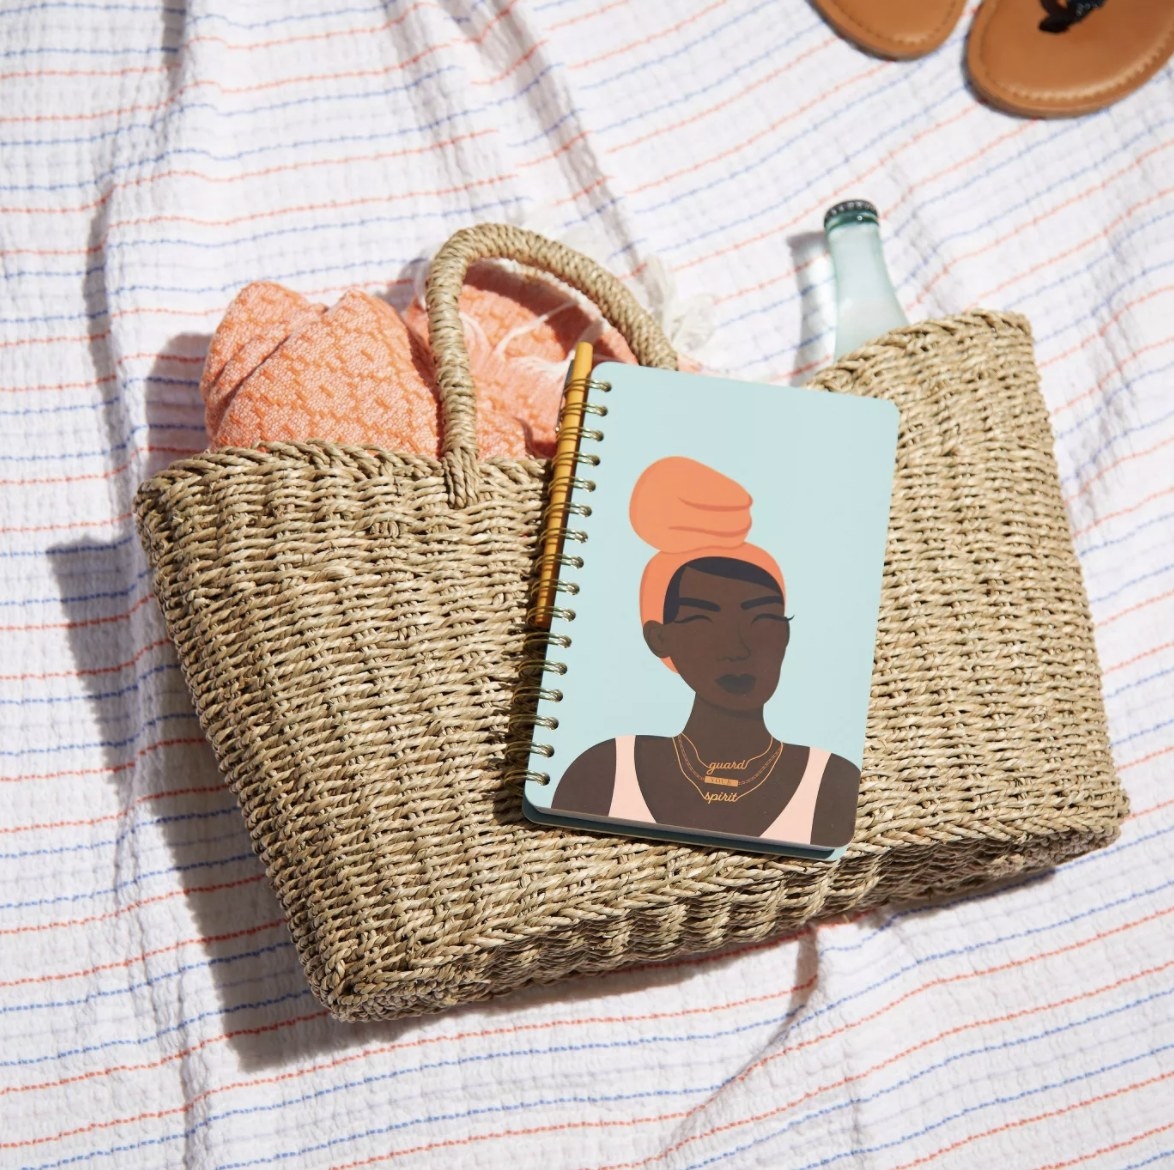 The journal has a light blue background and an illustration of an adult with dark skin, a coral hair wrap with, three layered gold-colored necklaces and a light pink top